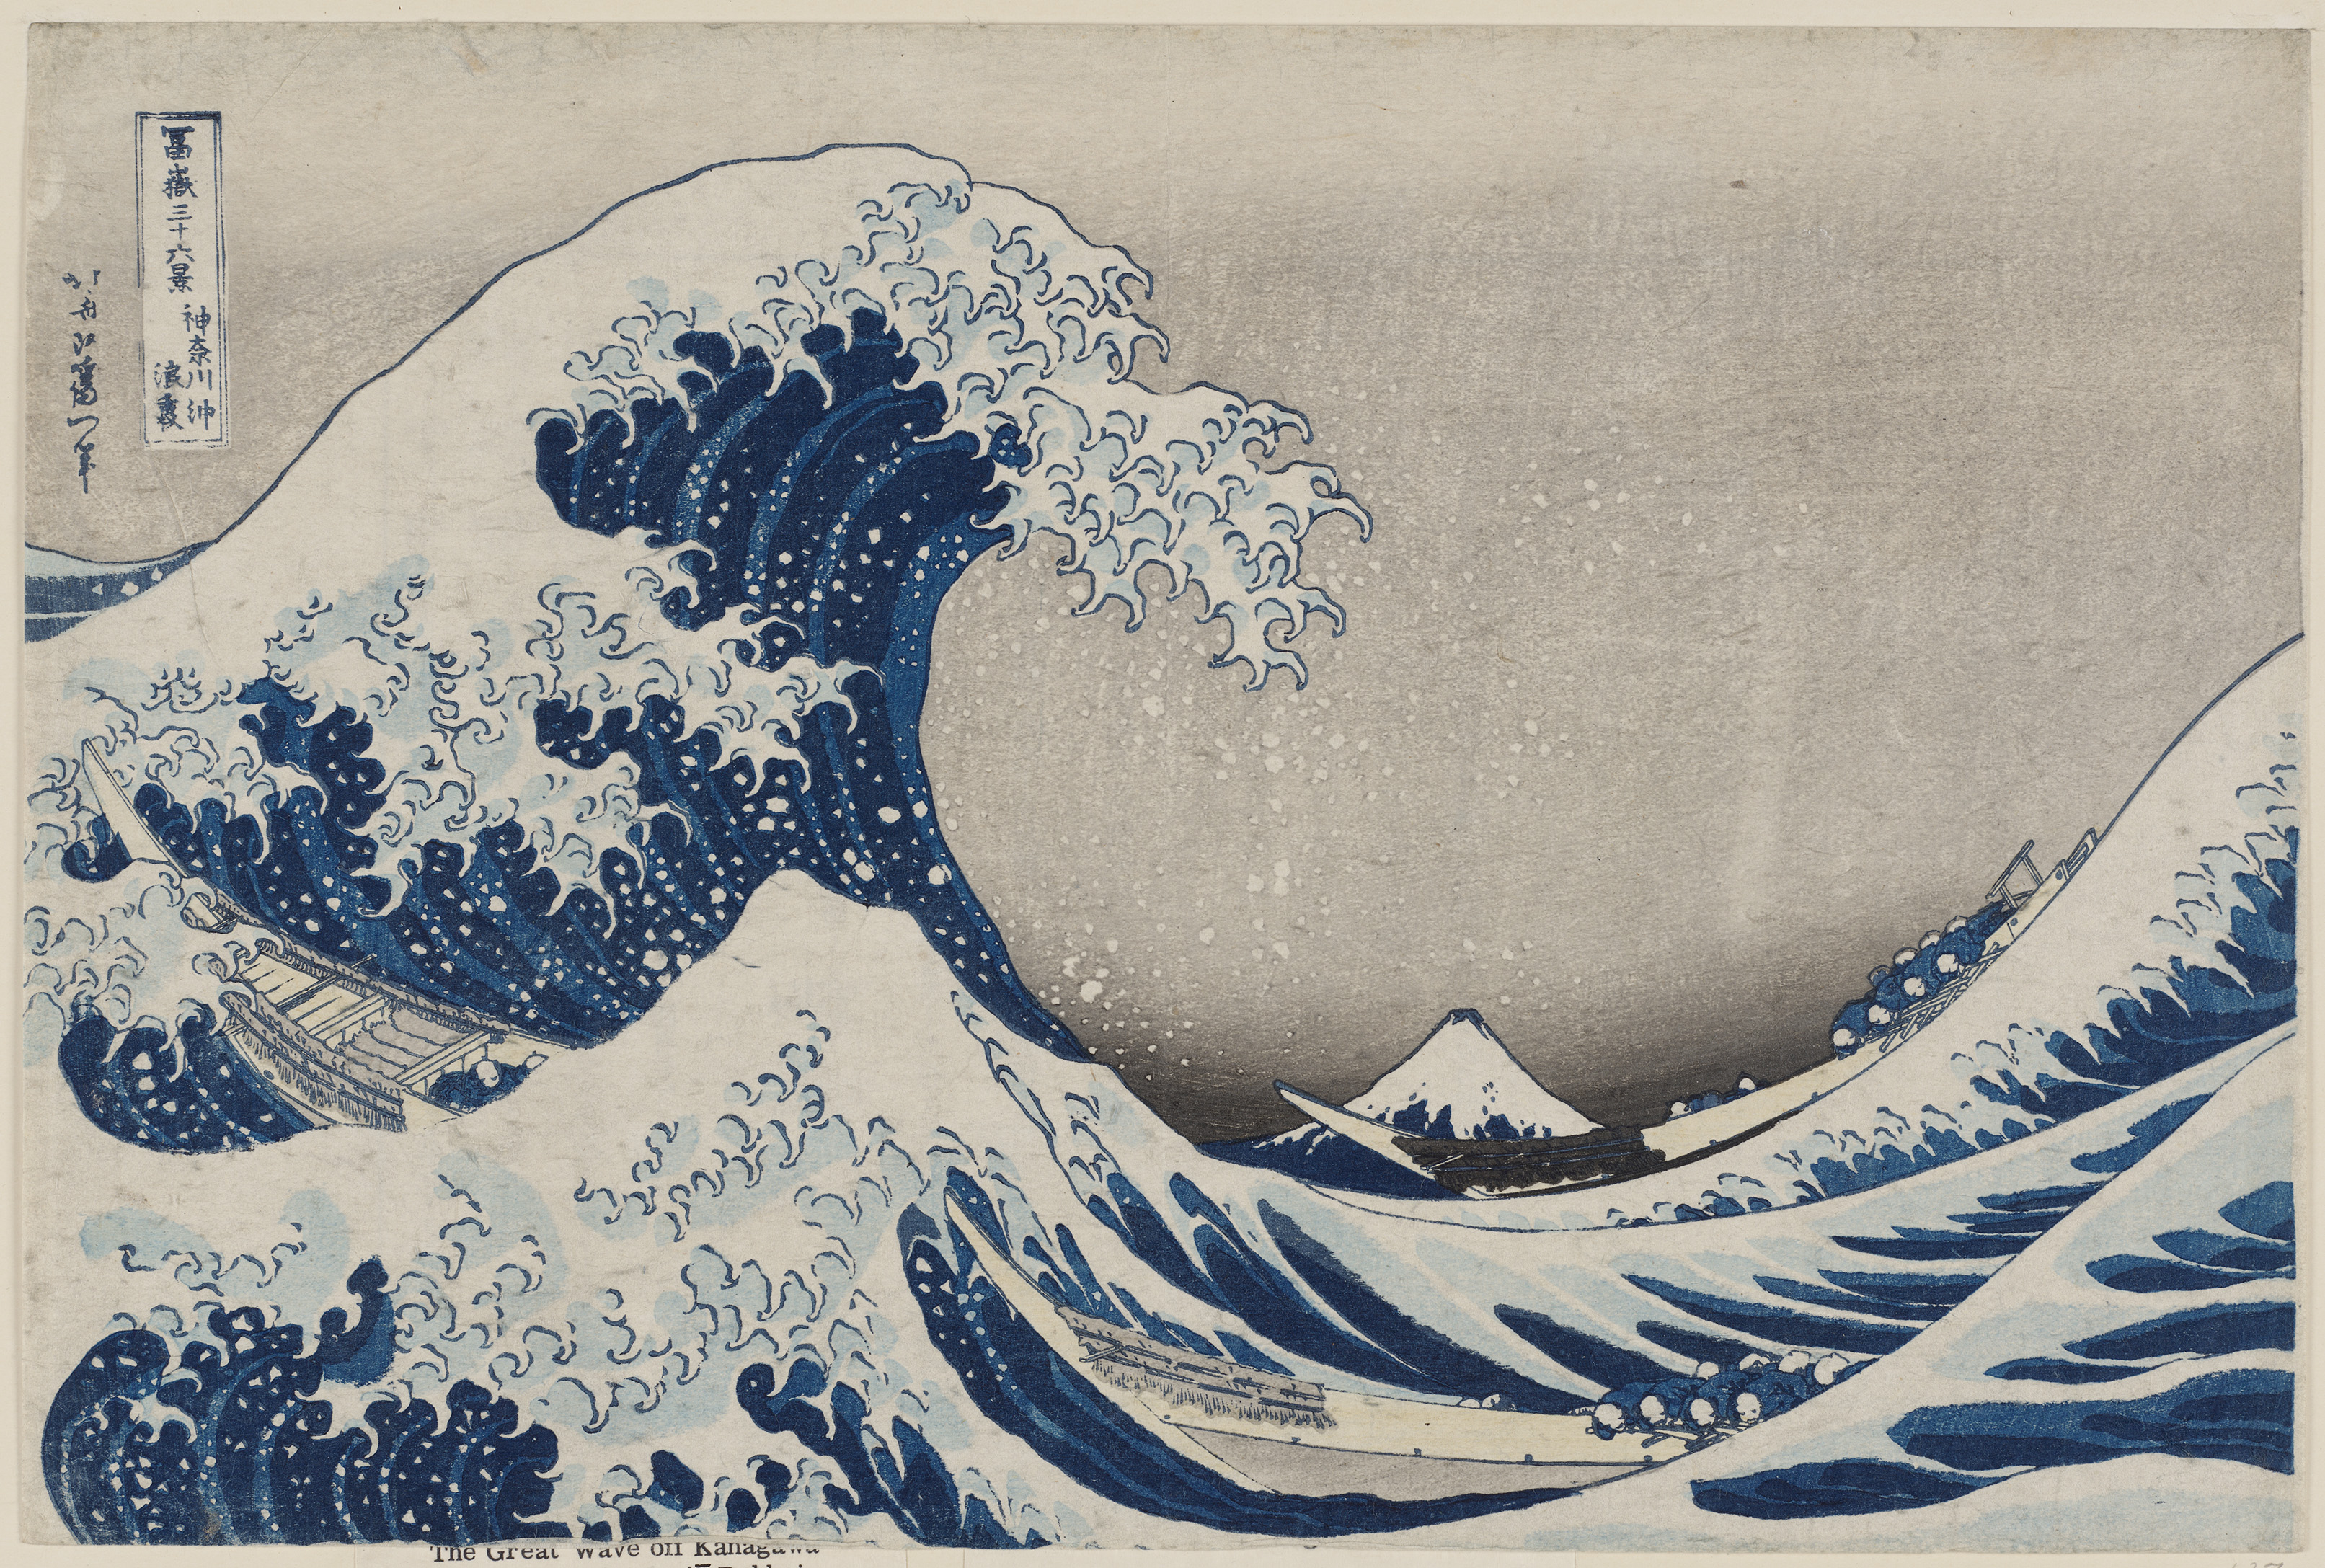 Forced Vintage Porn Drawings - At the MFA, Hokusai's oceans of influence - The Boston Globe